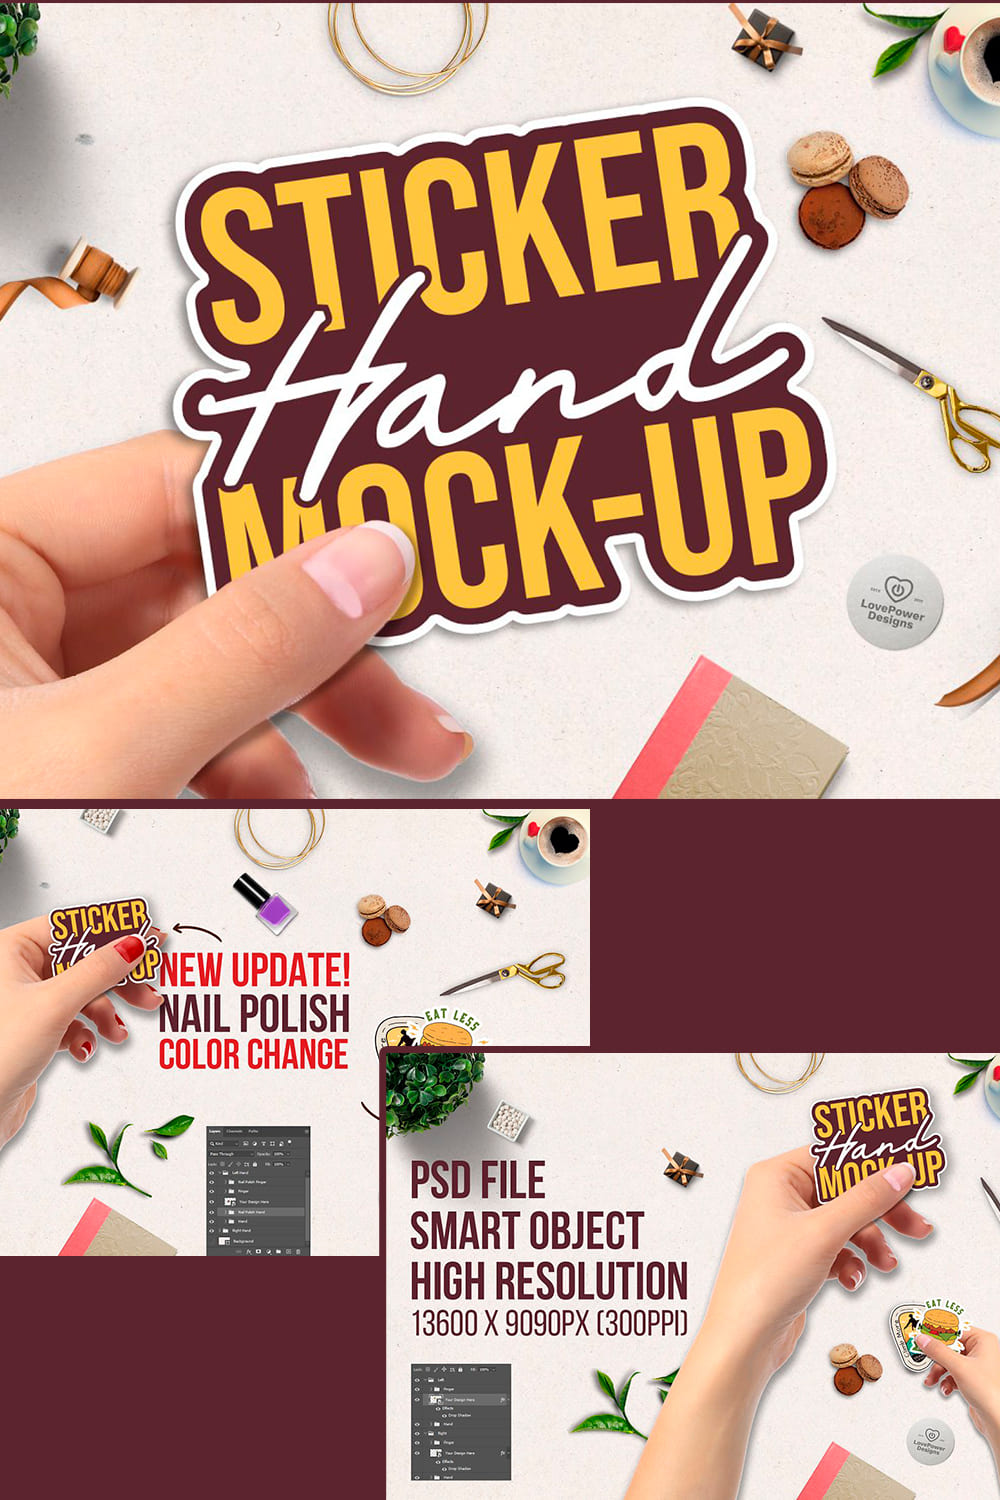 Set of images with adorable sticker mockups.